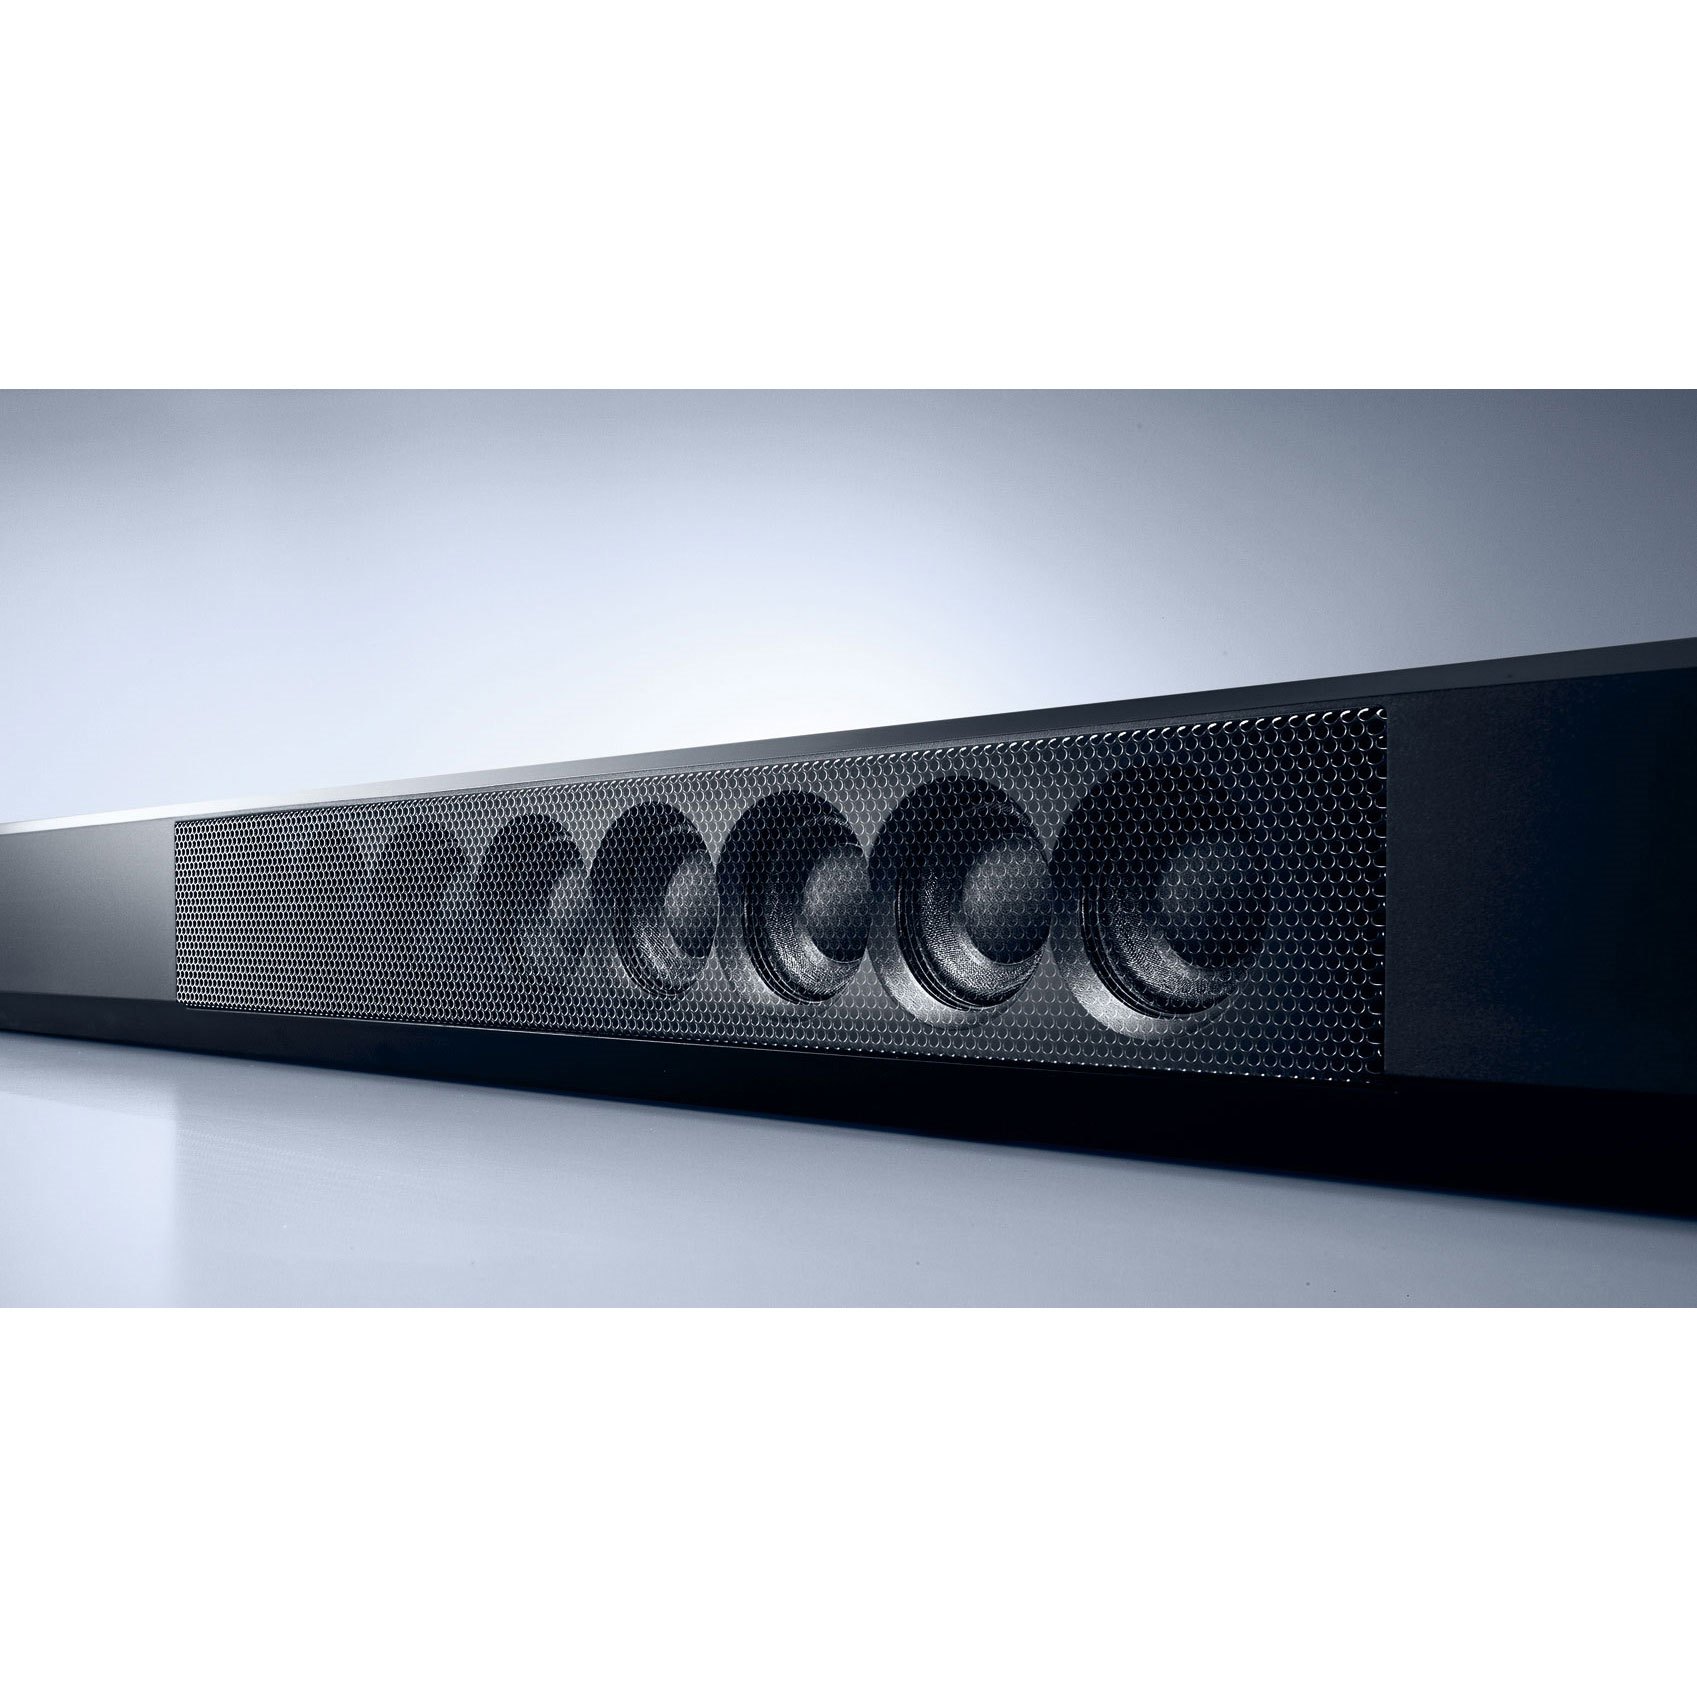 YSP-1600 - Overview - Sound Bar - Audio & Visual - Products 